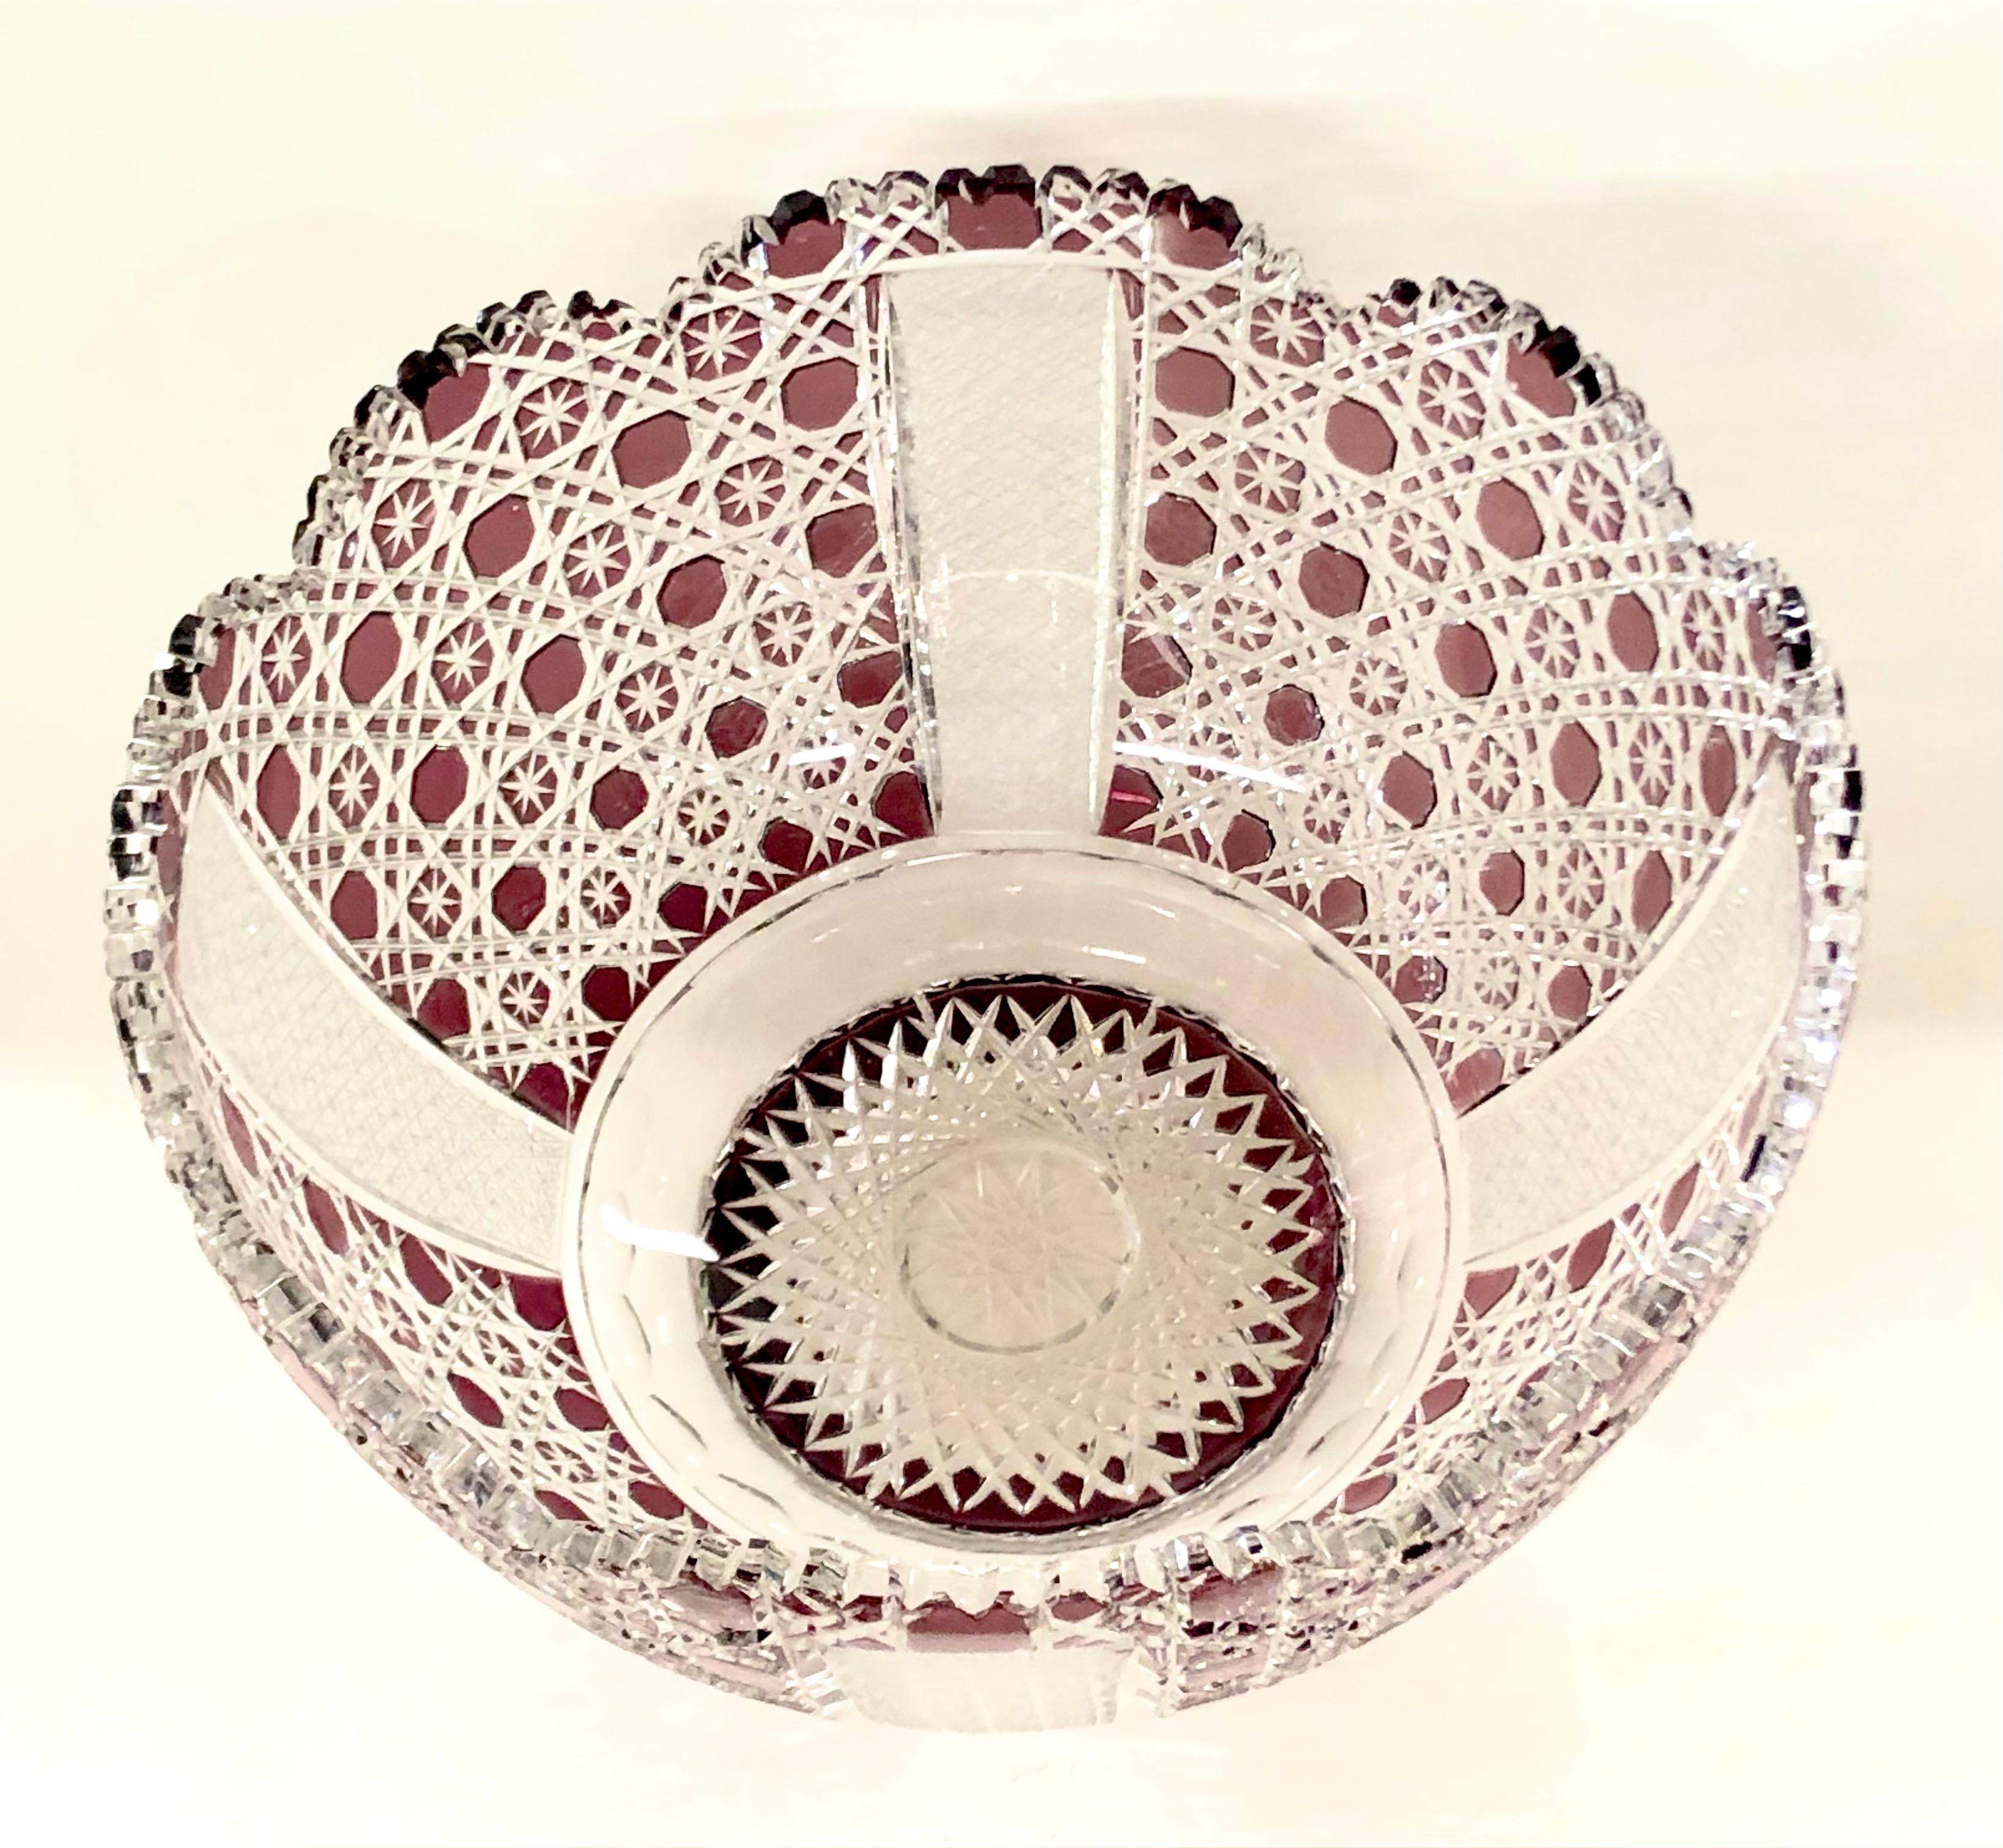 Mid-20th century Bohemian amethyst/cranberry cut-glass punch bowl, with crenellated and scalloped rim, cut overall with cross-cuts accented with star-cuts, similar to 